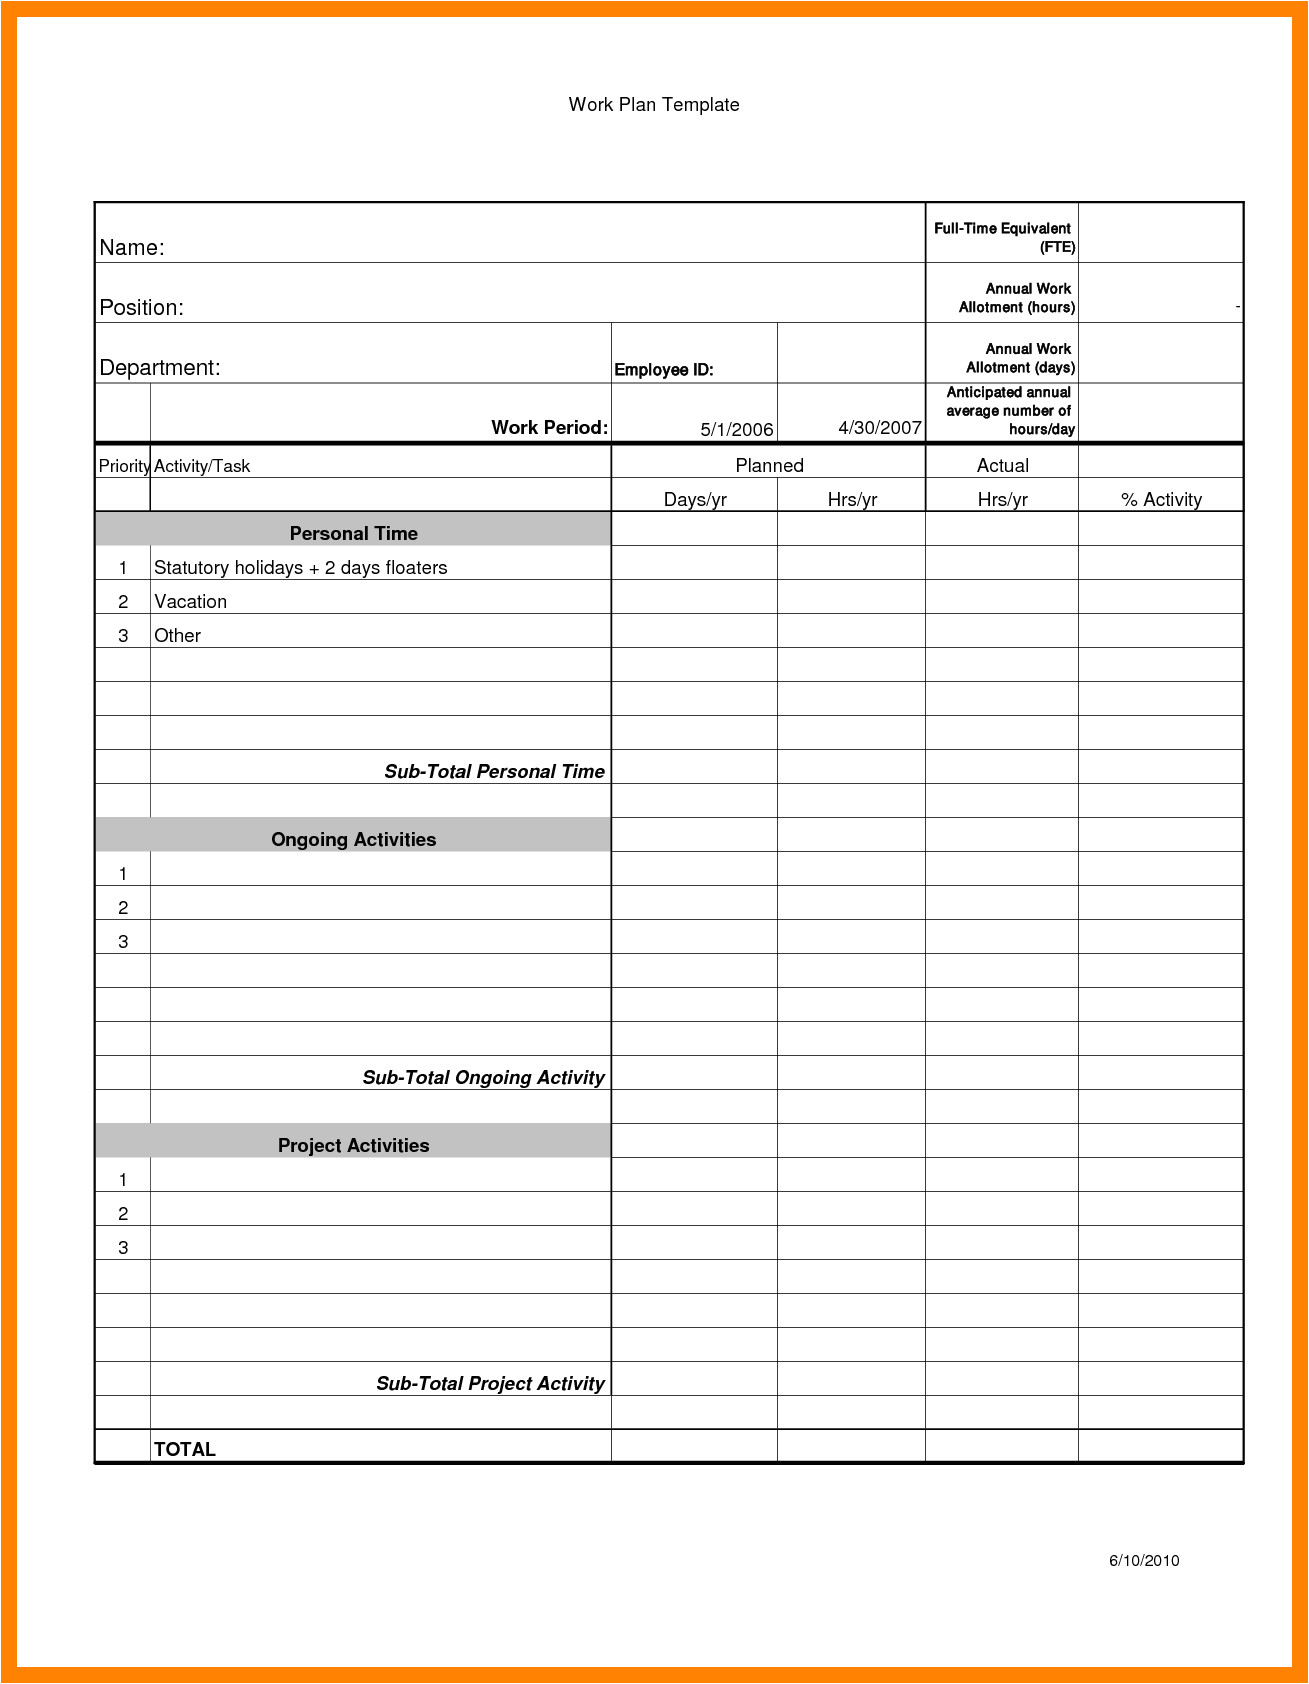 great work plan templates images work plan templates excel